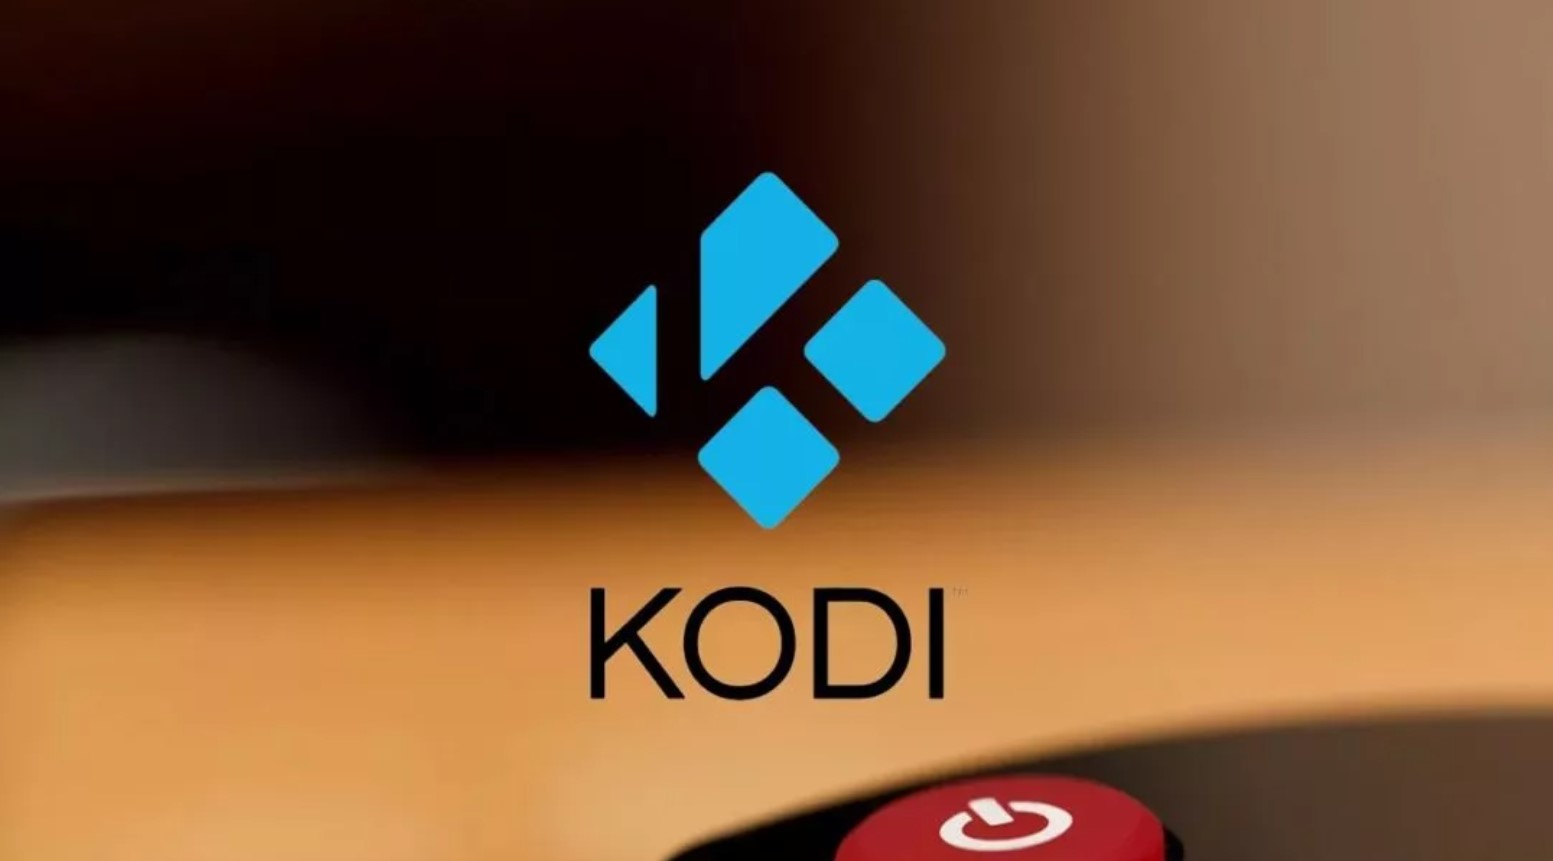 How To Use Kodi To Watch Free Movies In 2022